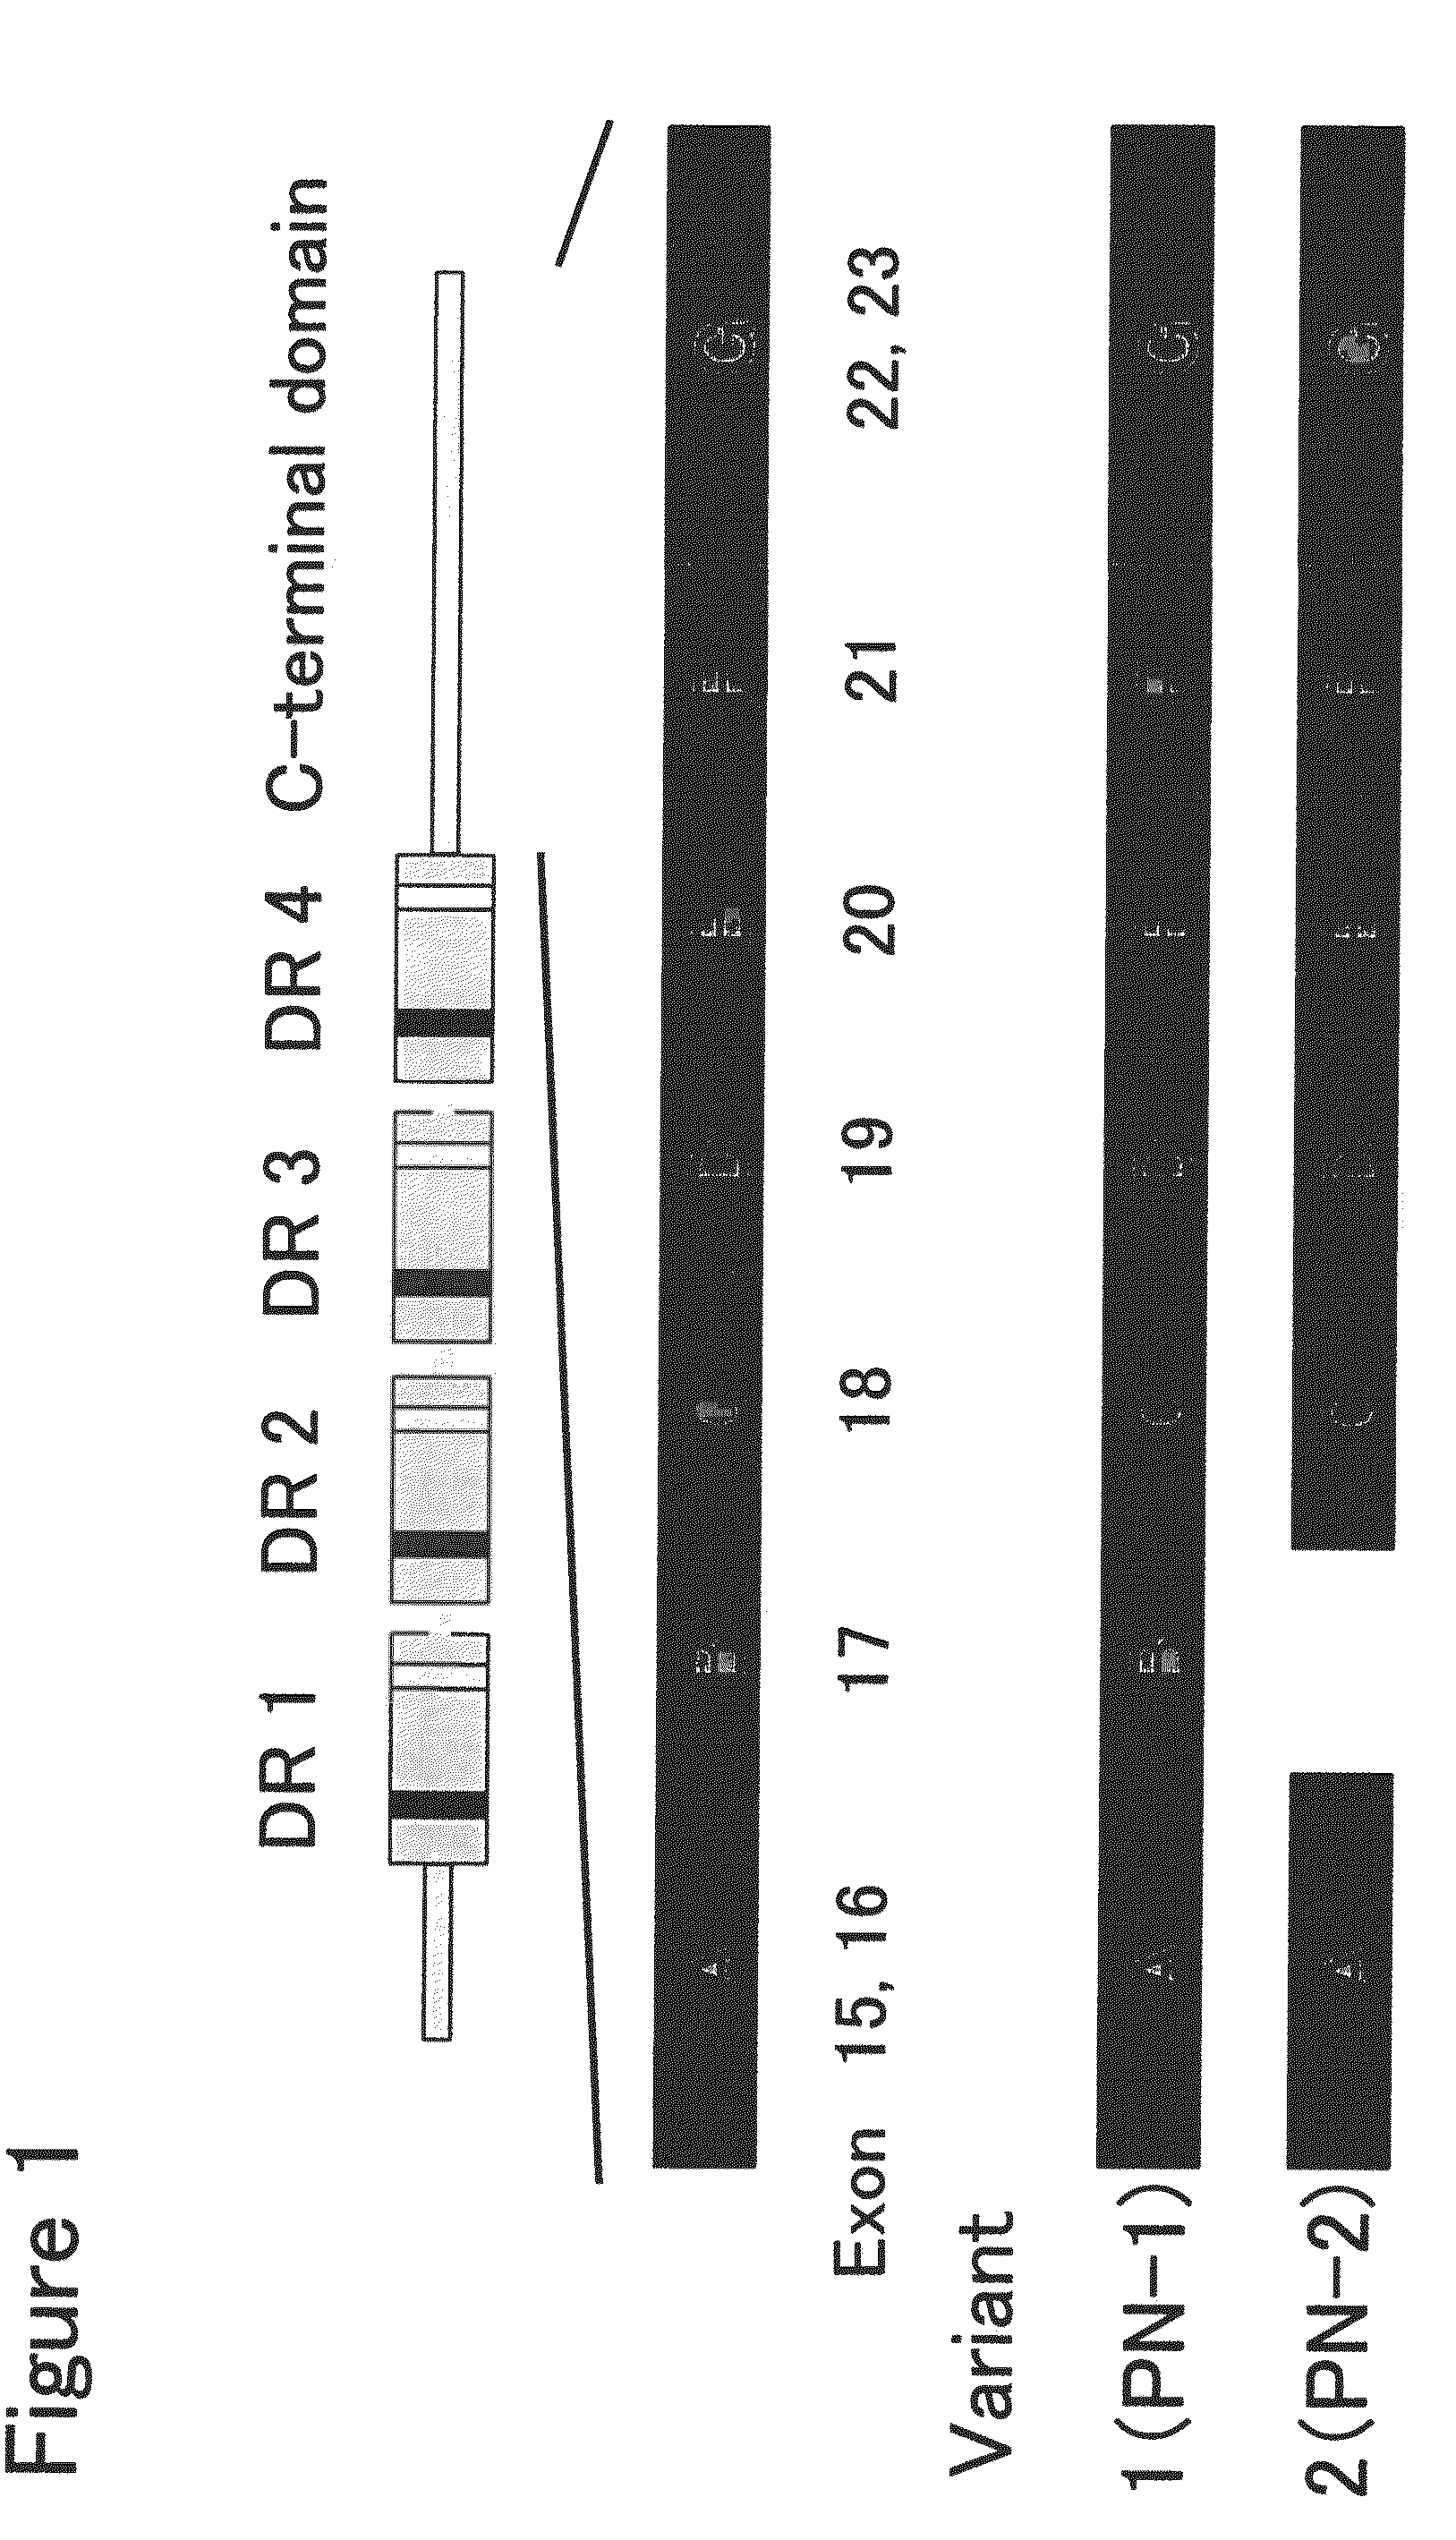 Antibody Against Periostin, and a Pharmaceutical Composition comprising it for Preventing or Treating a Disease in which Periostin is Involved